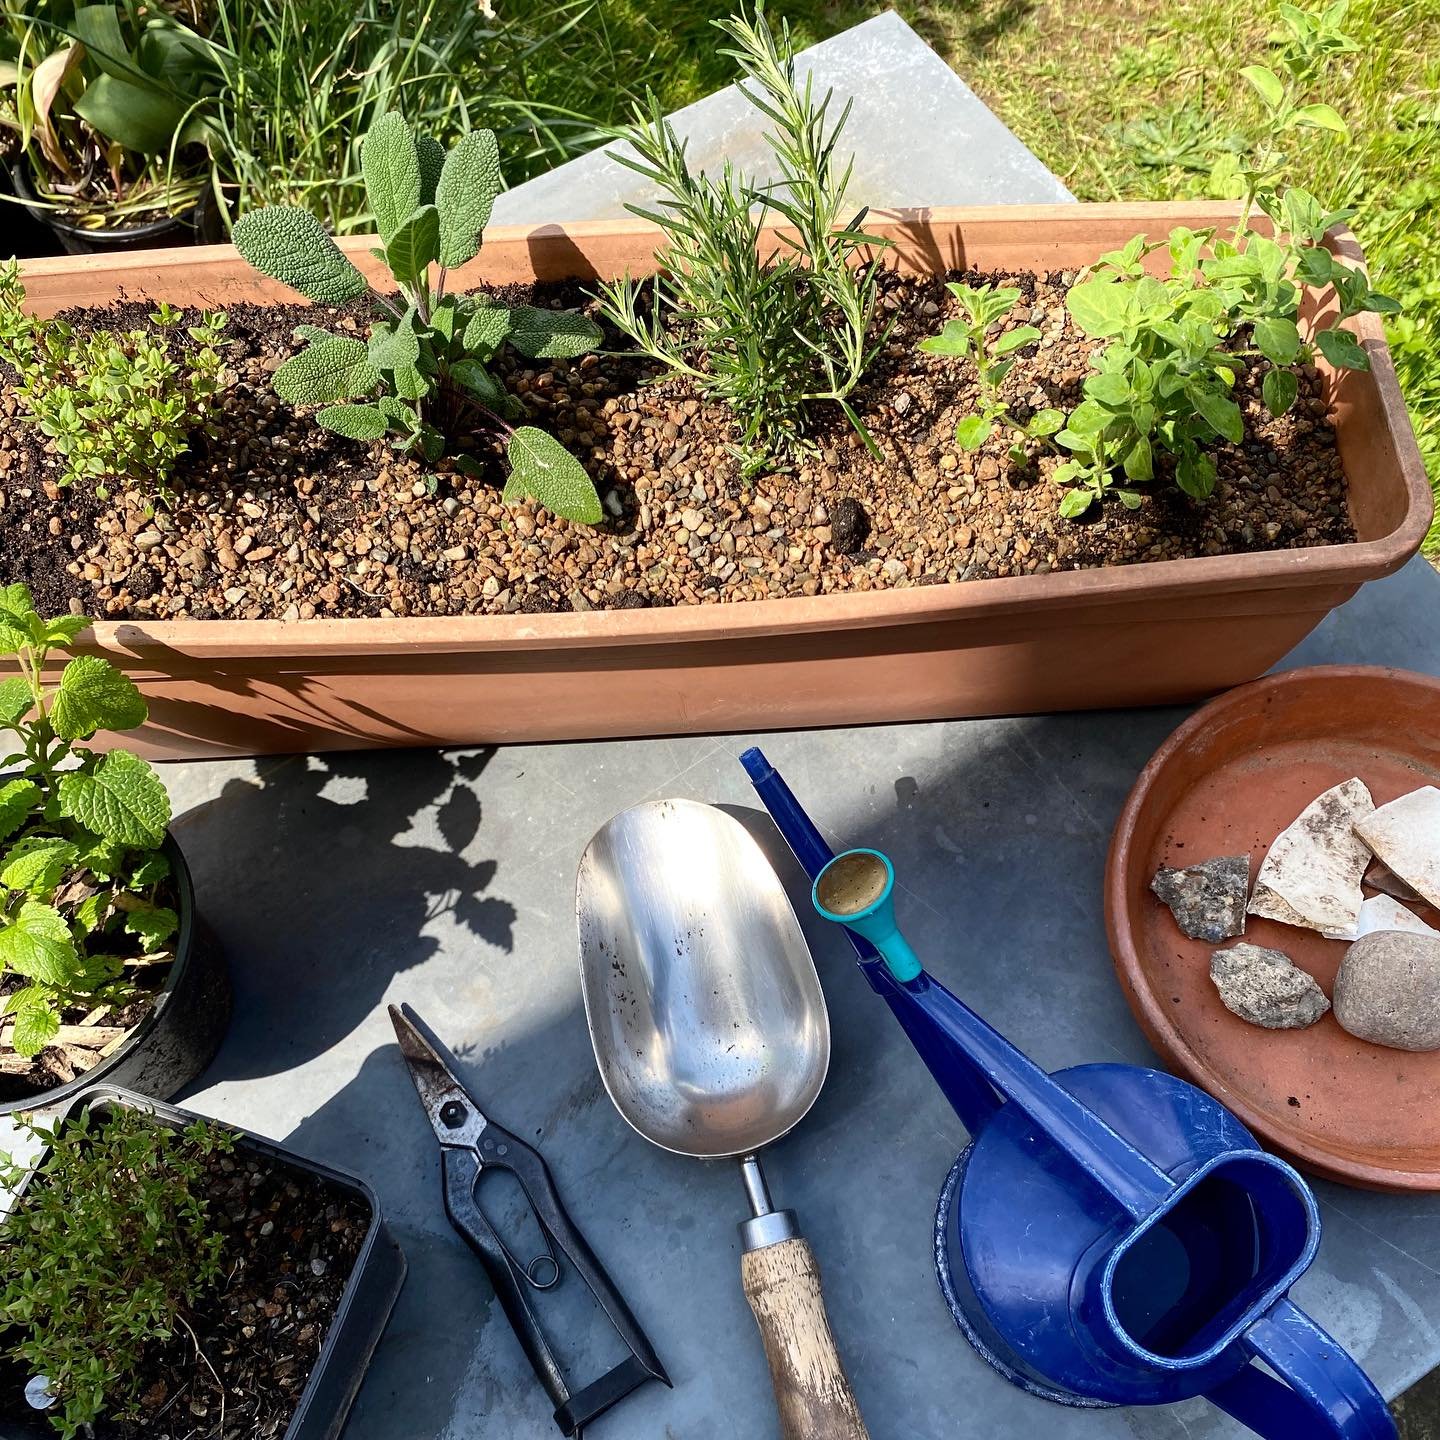 The sun is here and the weather has finally warmed up 🌞 May is the perfect time to get going on a growing and gardening project. We often find that seeds we sow now grow quickly and catch up with others we have sown earlier in the season. 

Here are